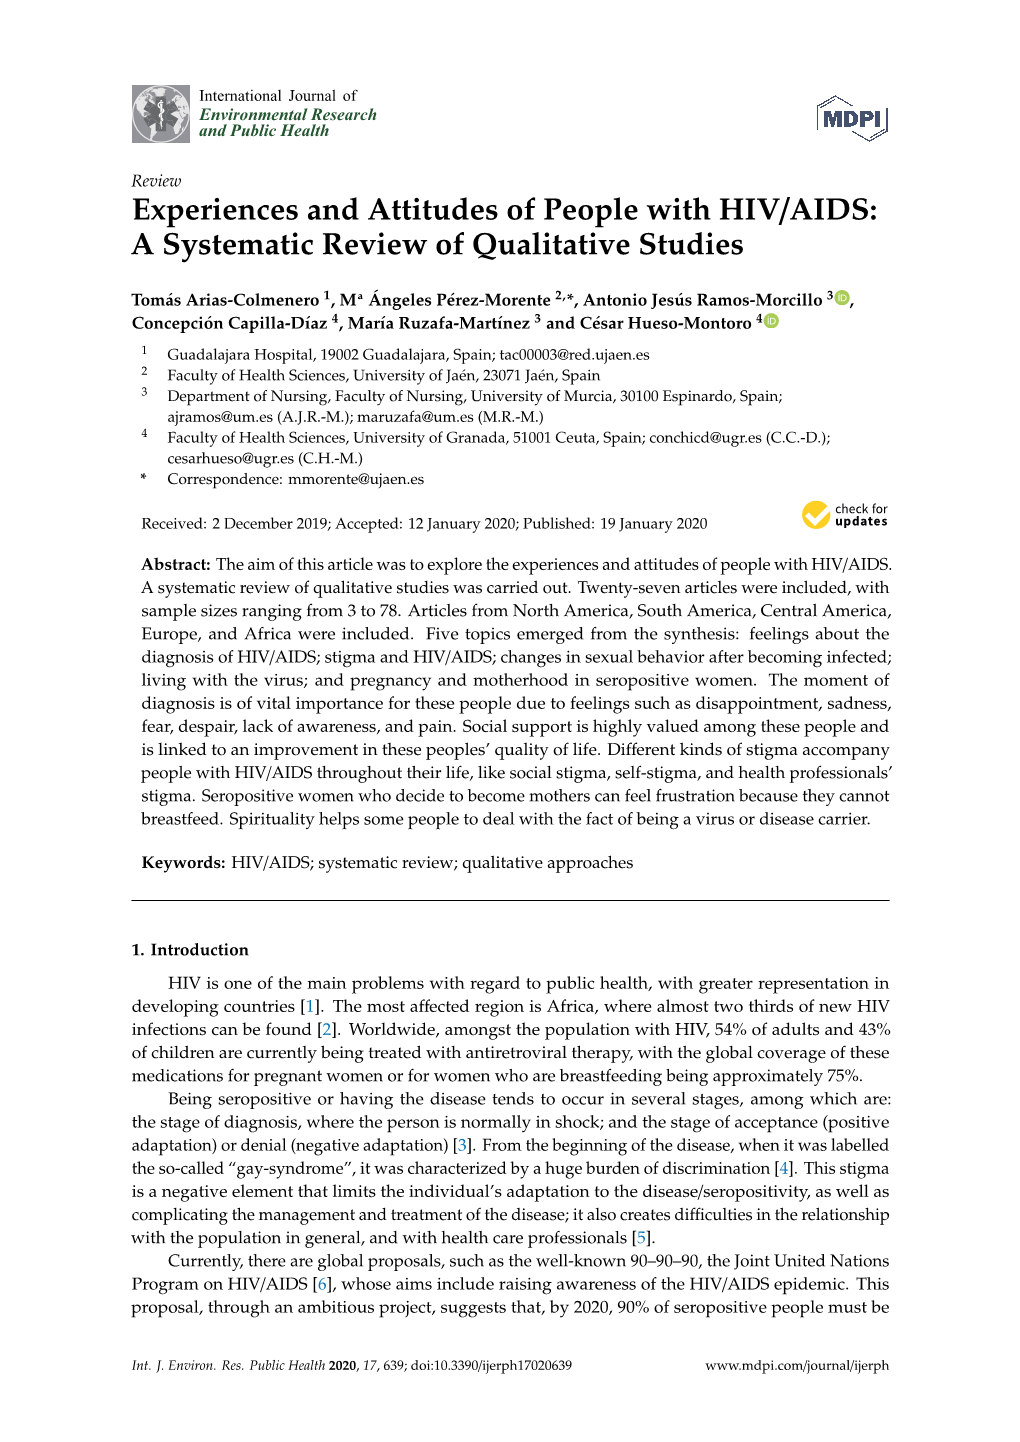 Experiences and Attitudes of People with HIV/AIDS: a Systematic Review of Qualitative Studies